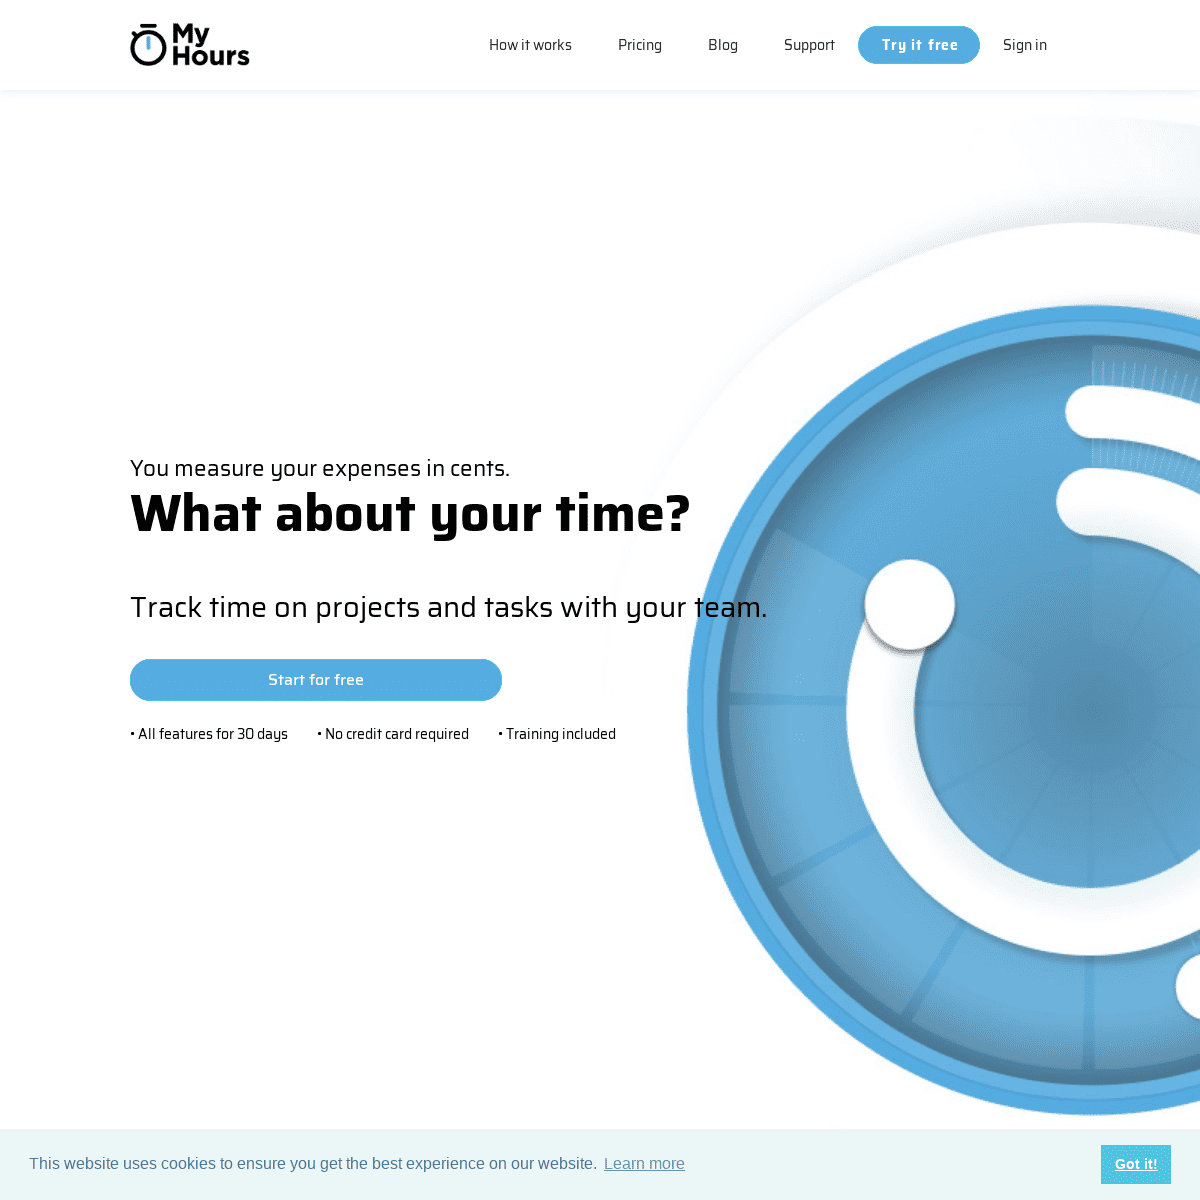 Time Tracking for your Projects and Tasks - My Hours